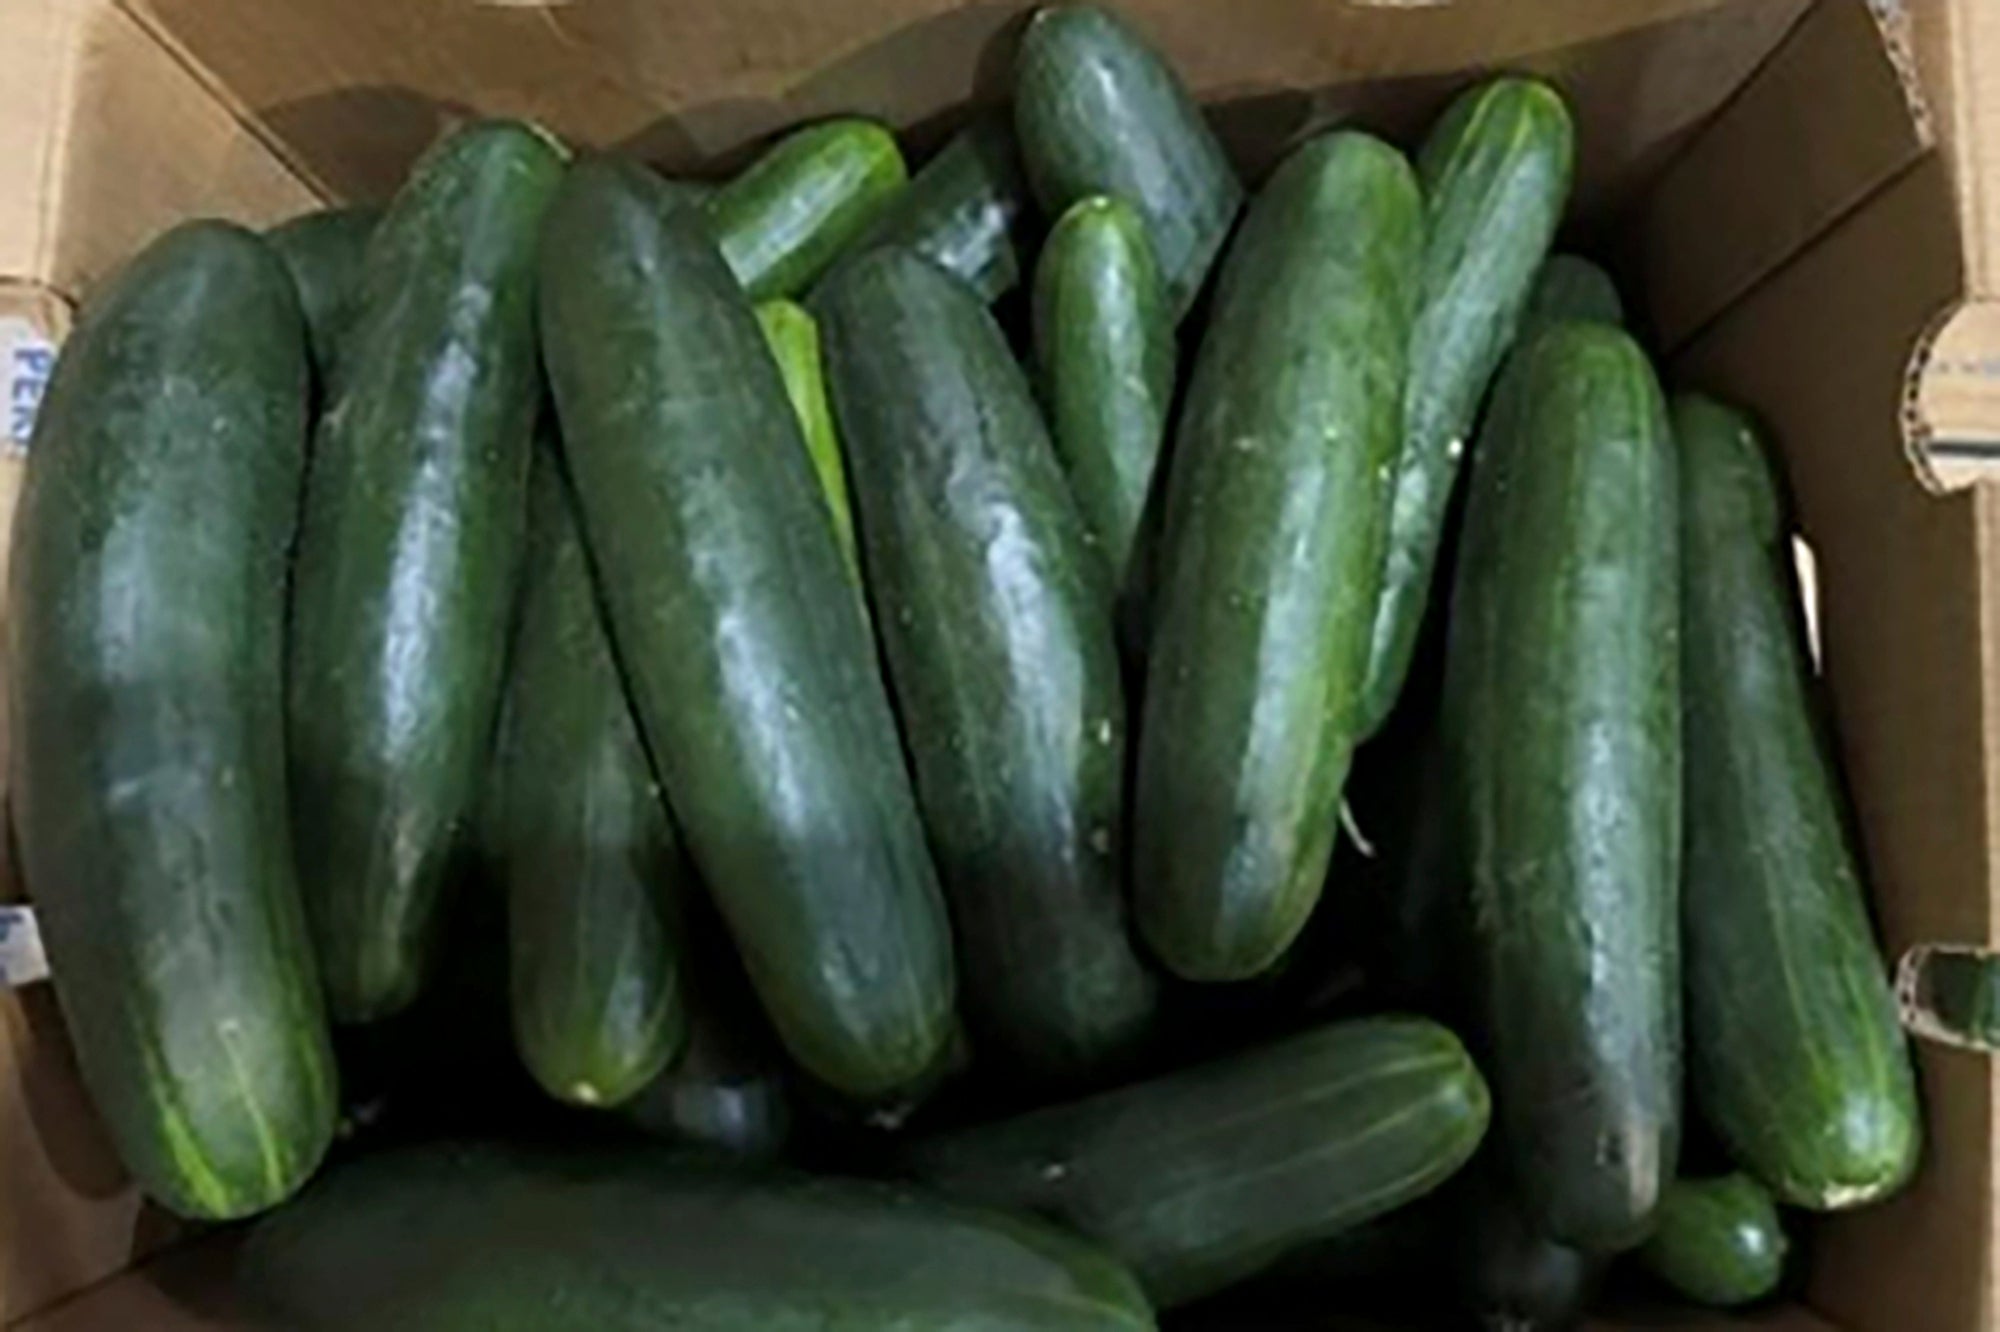 This undated photo provided by the U.S. Food and Drug Administration shows cucumbers in Florida recalled